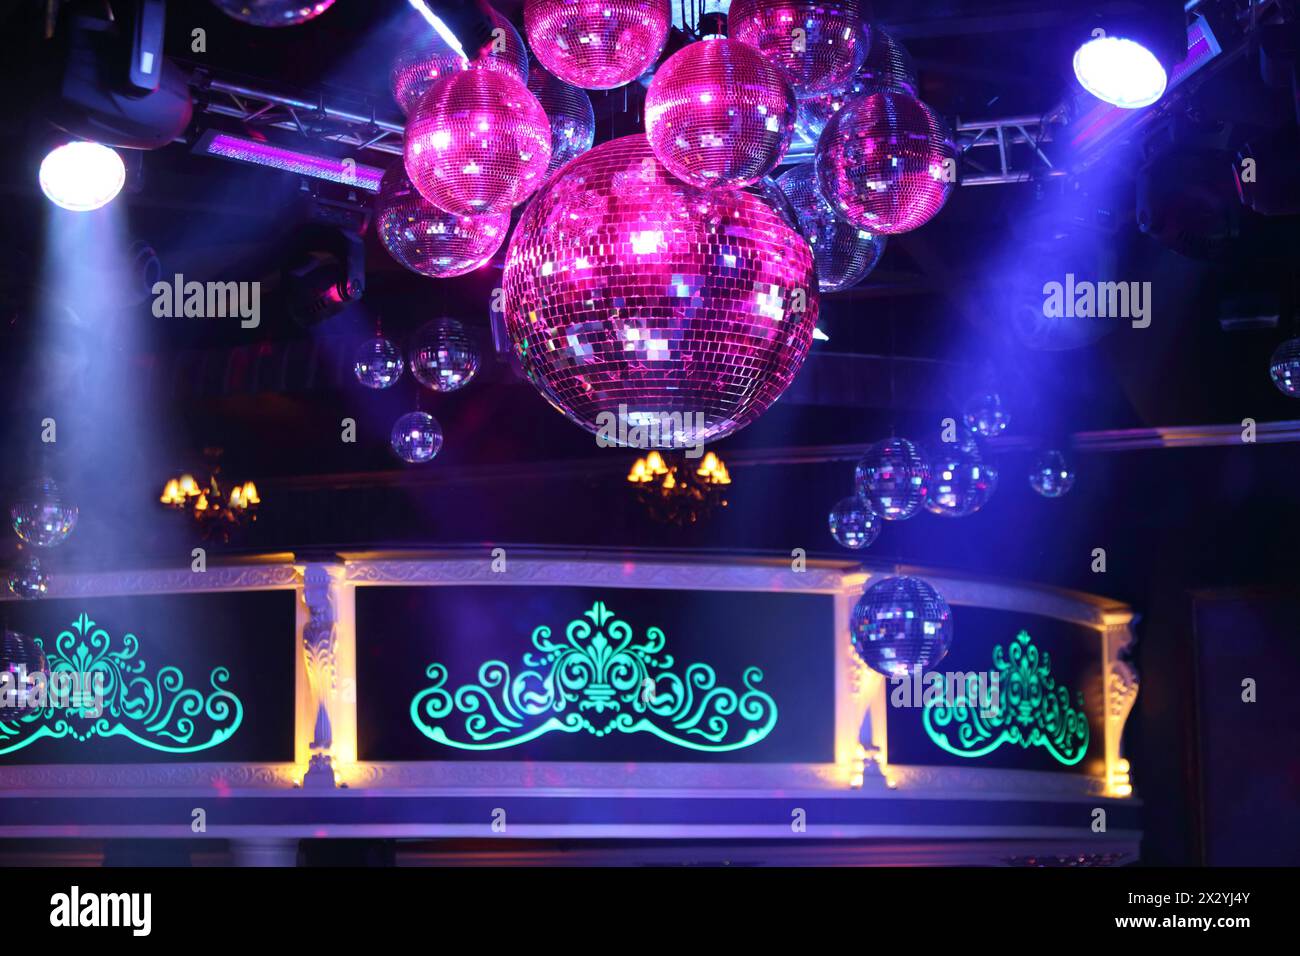 MOSCOW - SEP 21: The part of interior of the nightclub Base with mirror balls  on September 21, 2012 in Moscow, Russia. Stock Photo